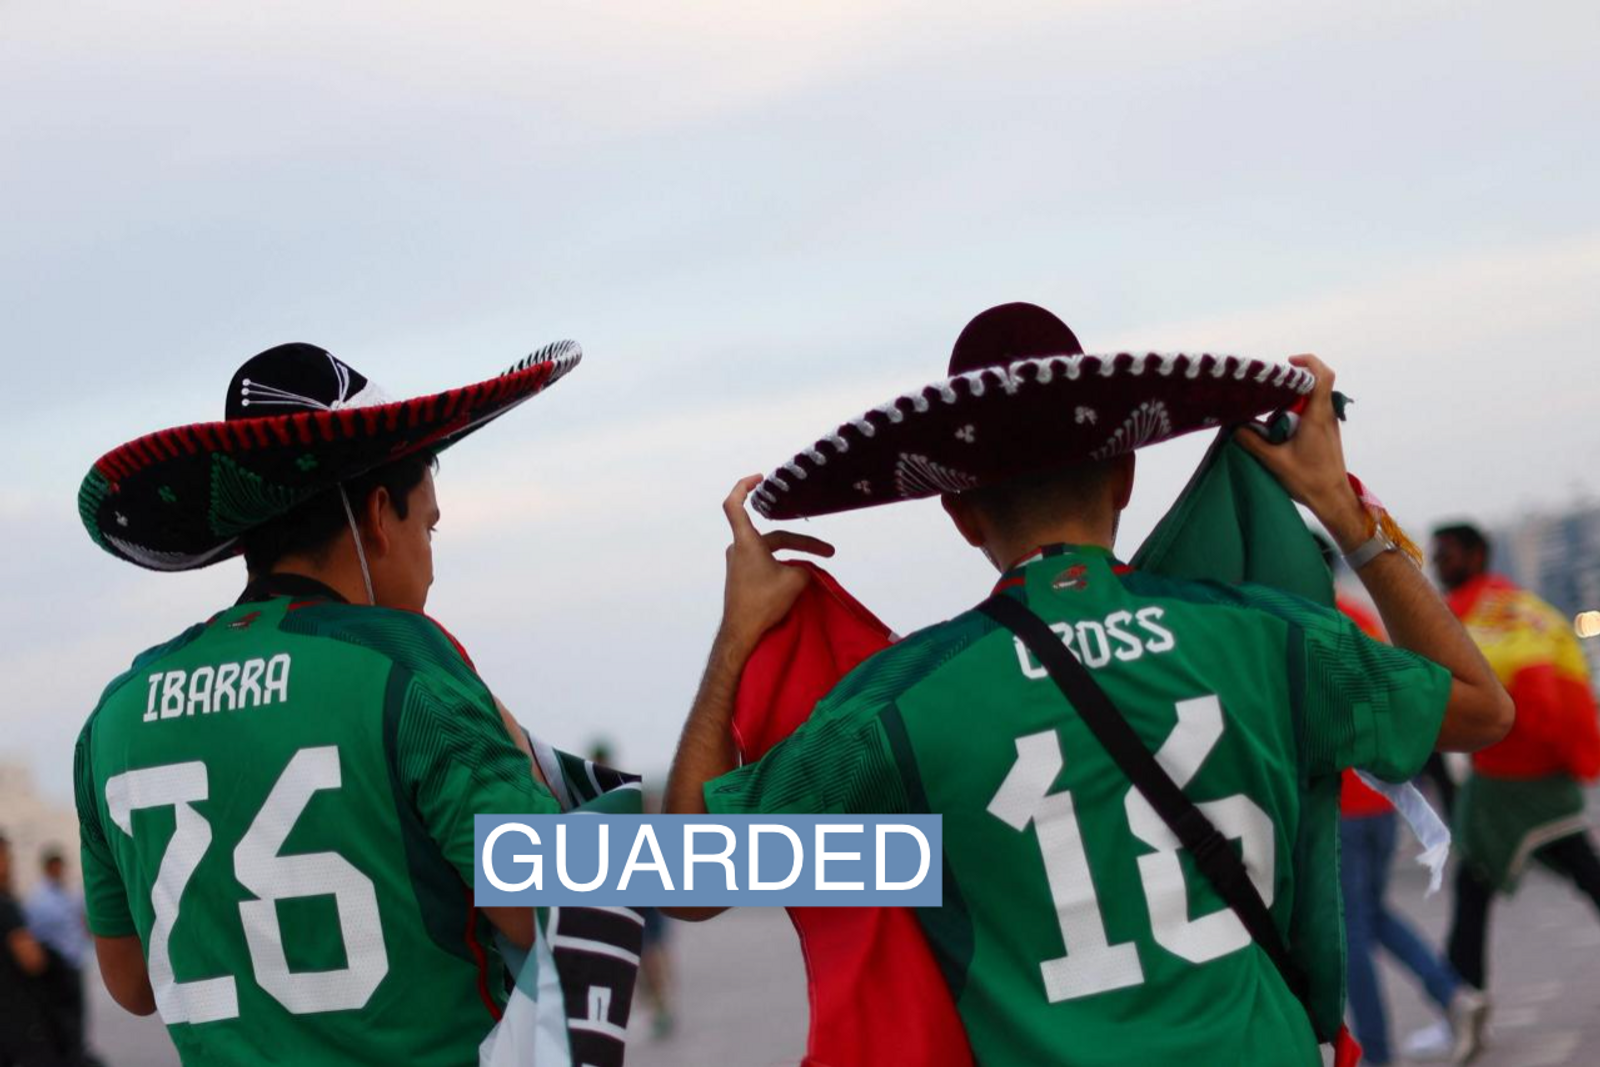 Mexico fans ahead of the World Cup in Qatar.